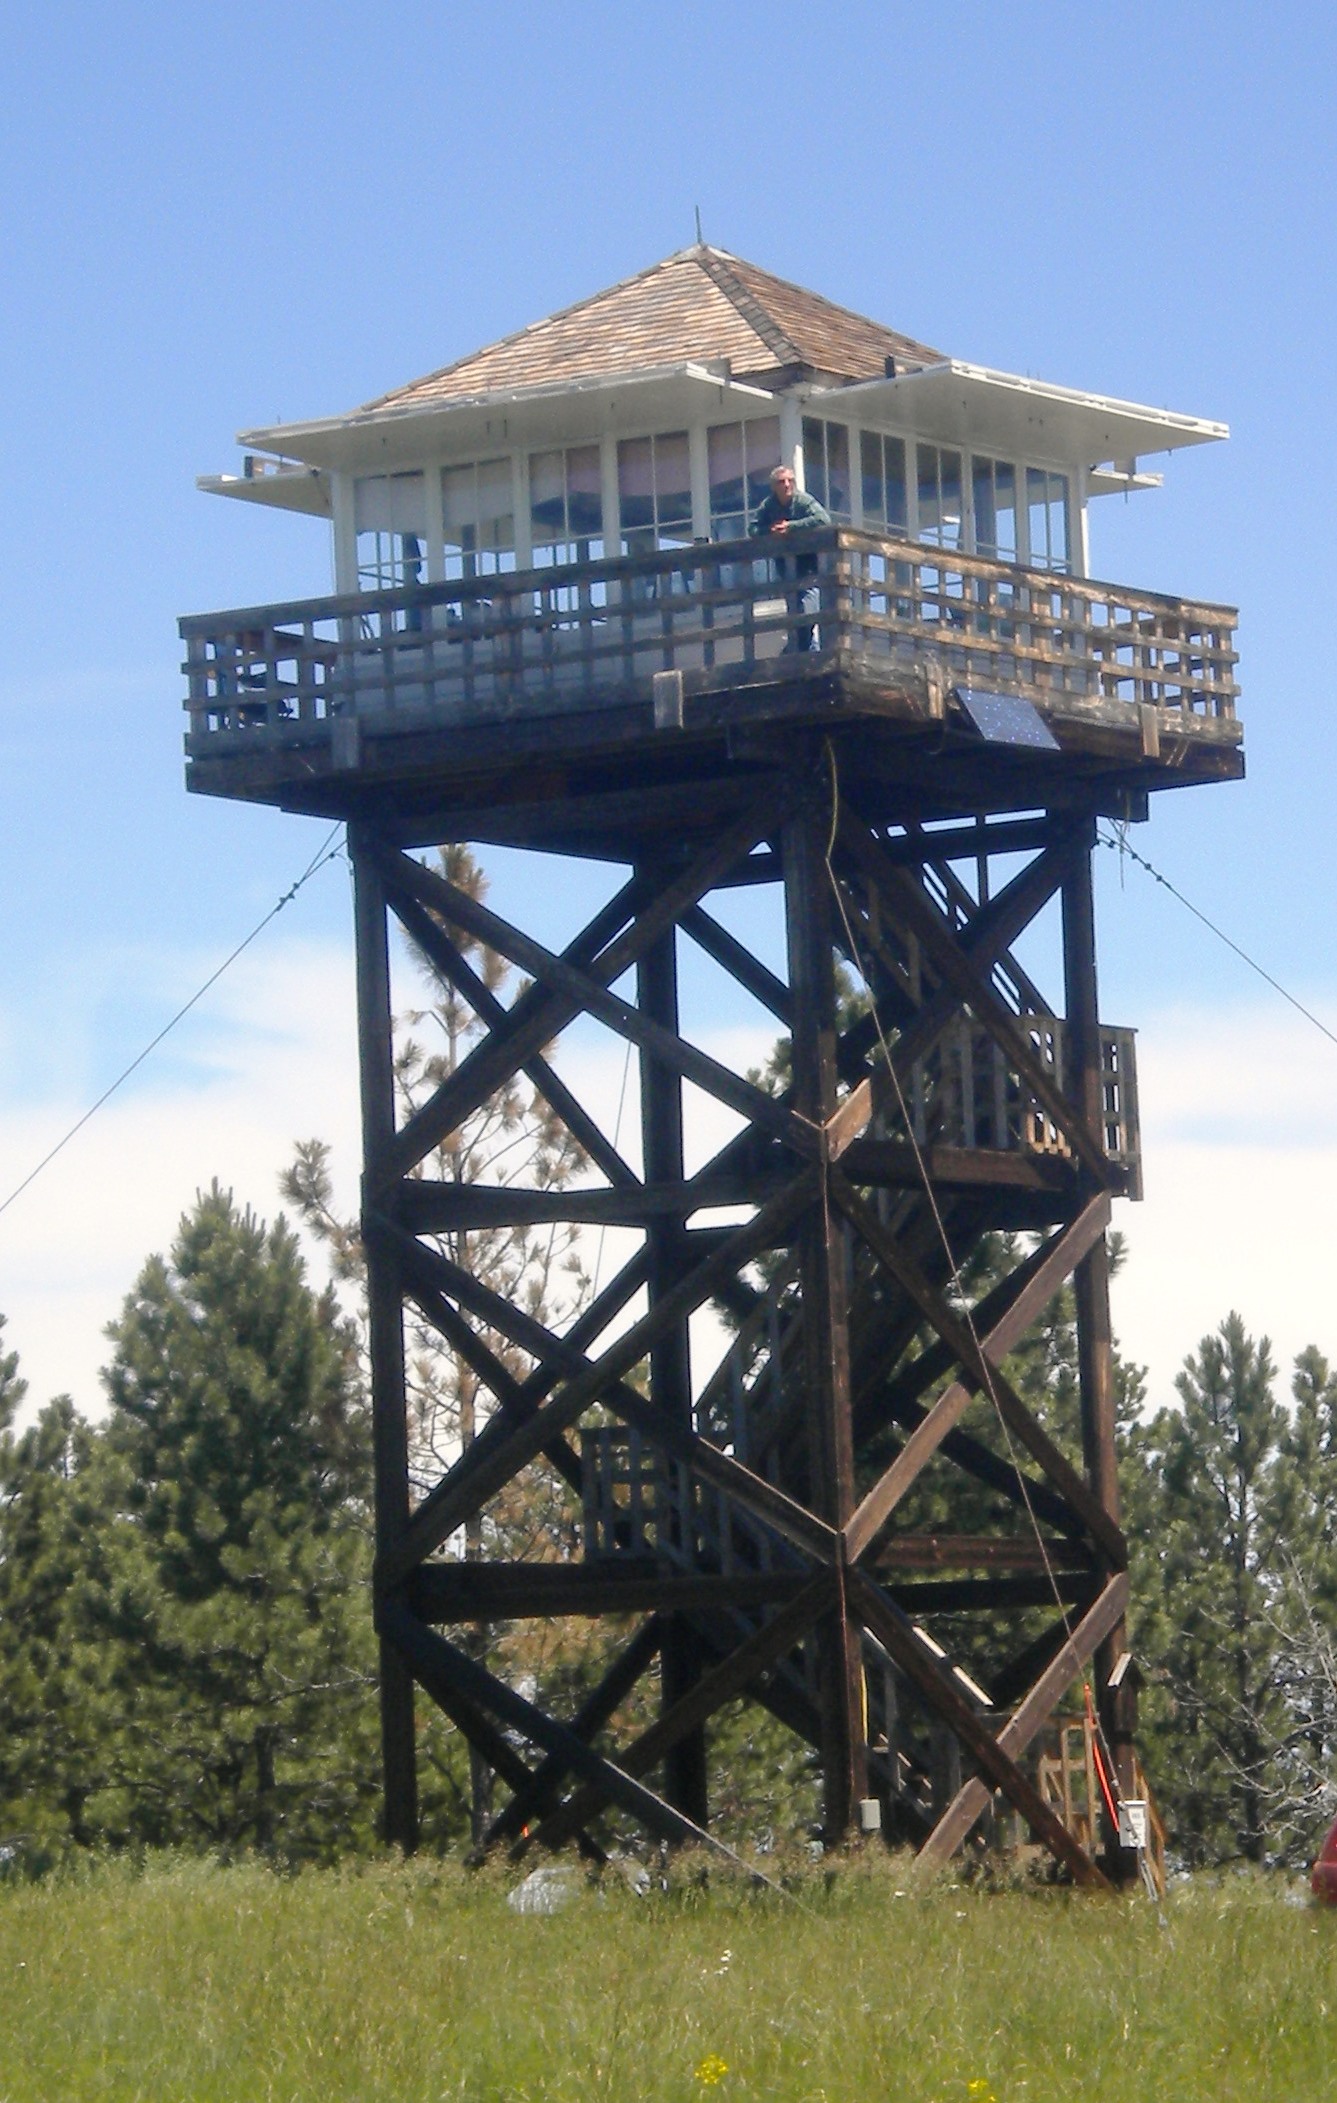 A photo of a fire lookout tower. A person is standing on the deck looking out from the tower. Pine trees are behind the tower.